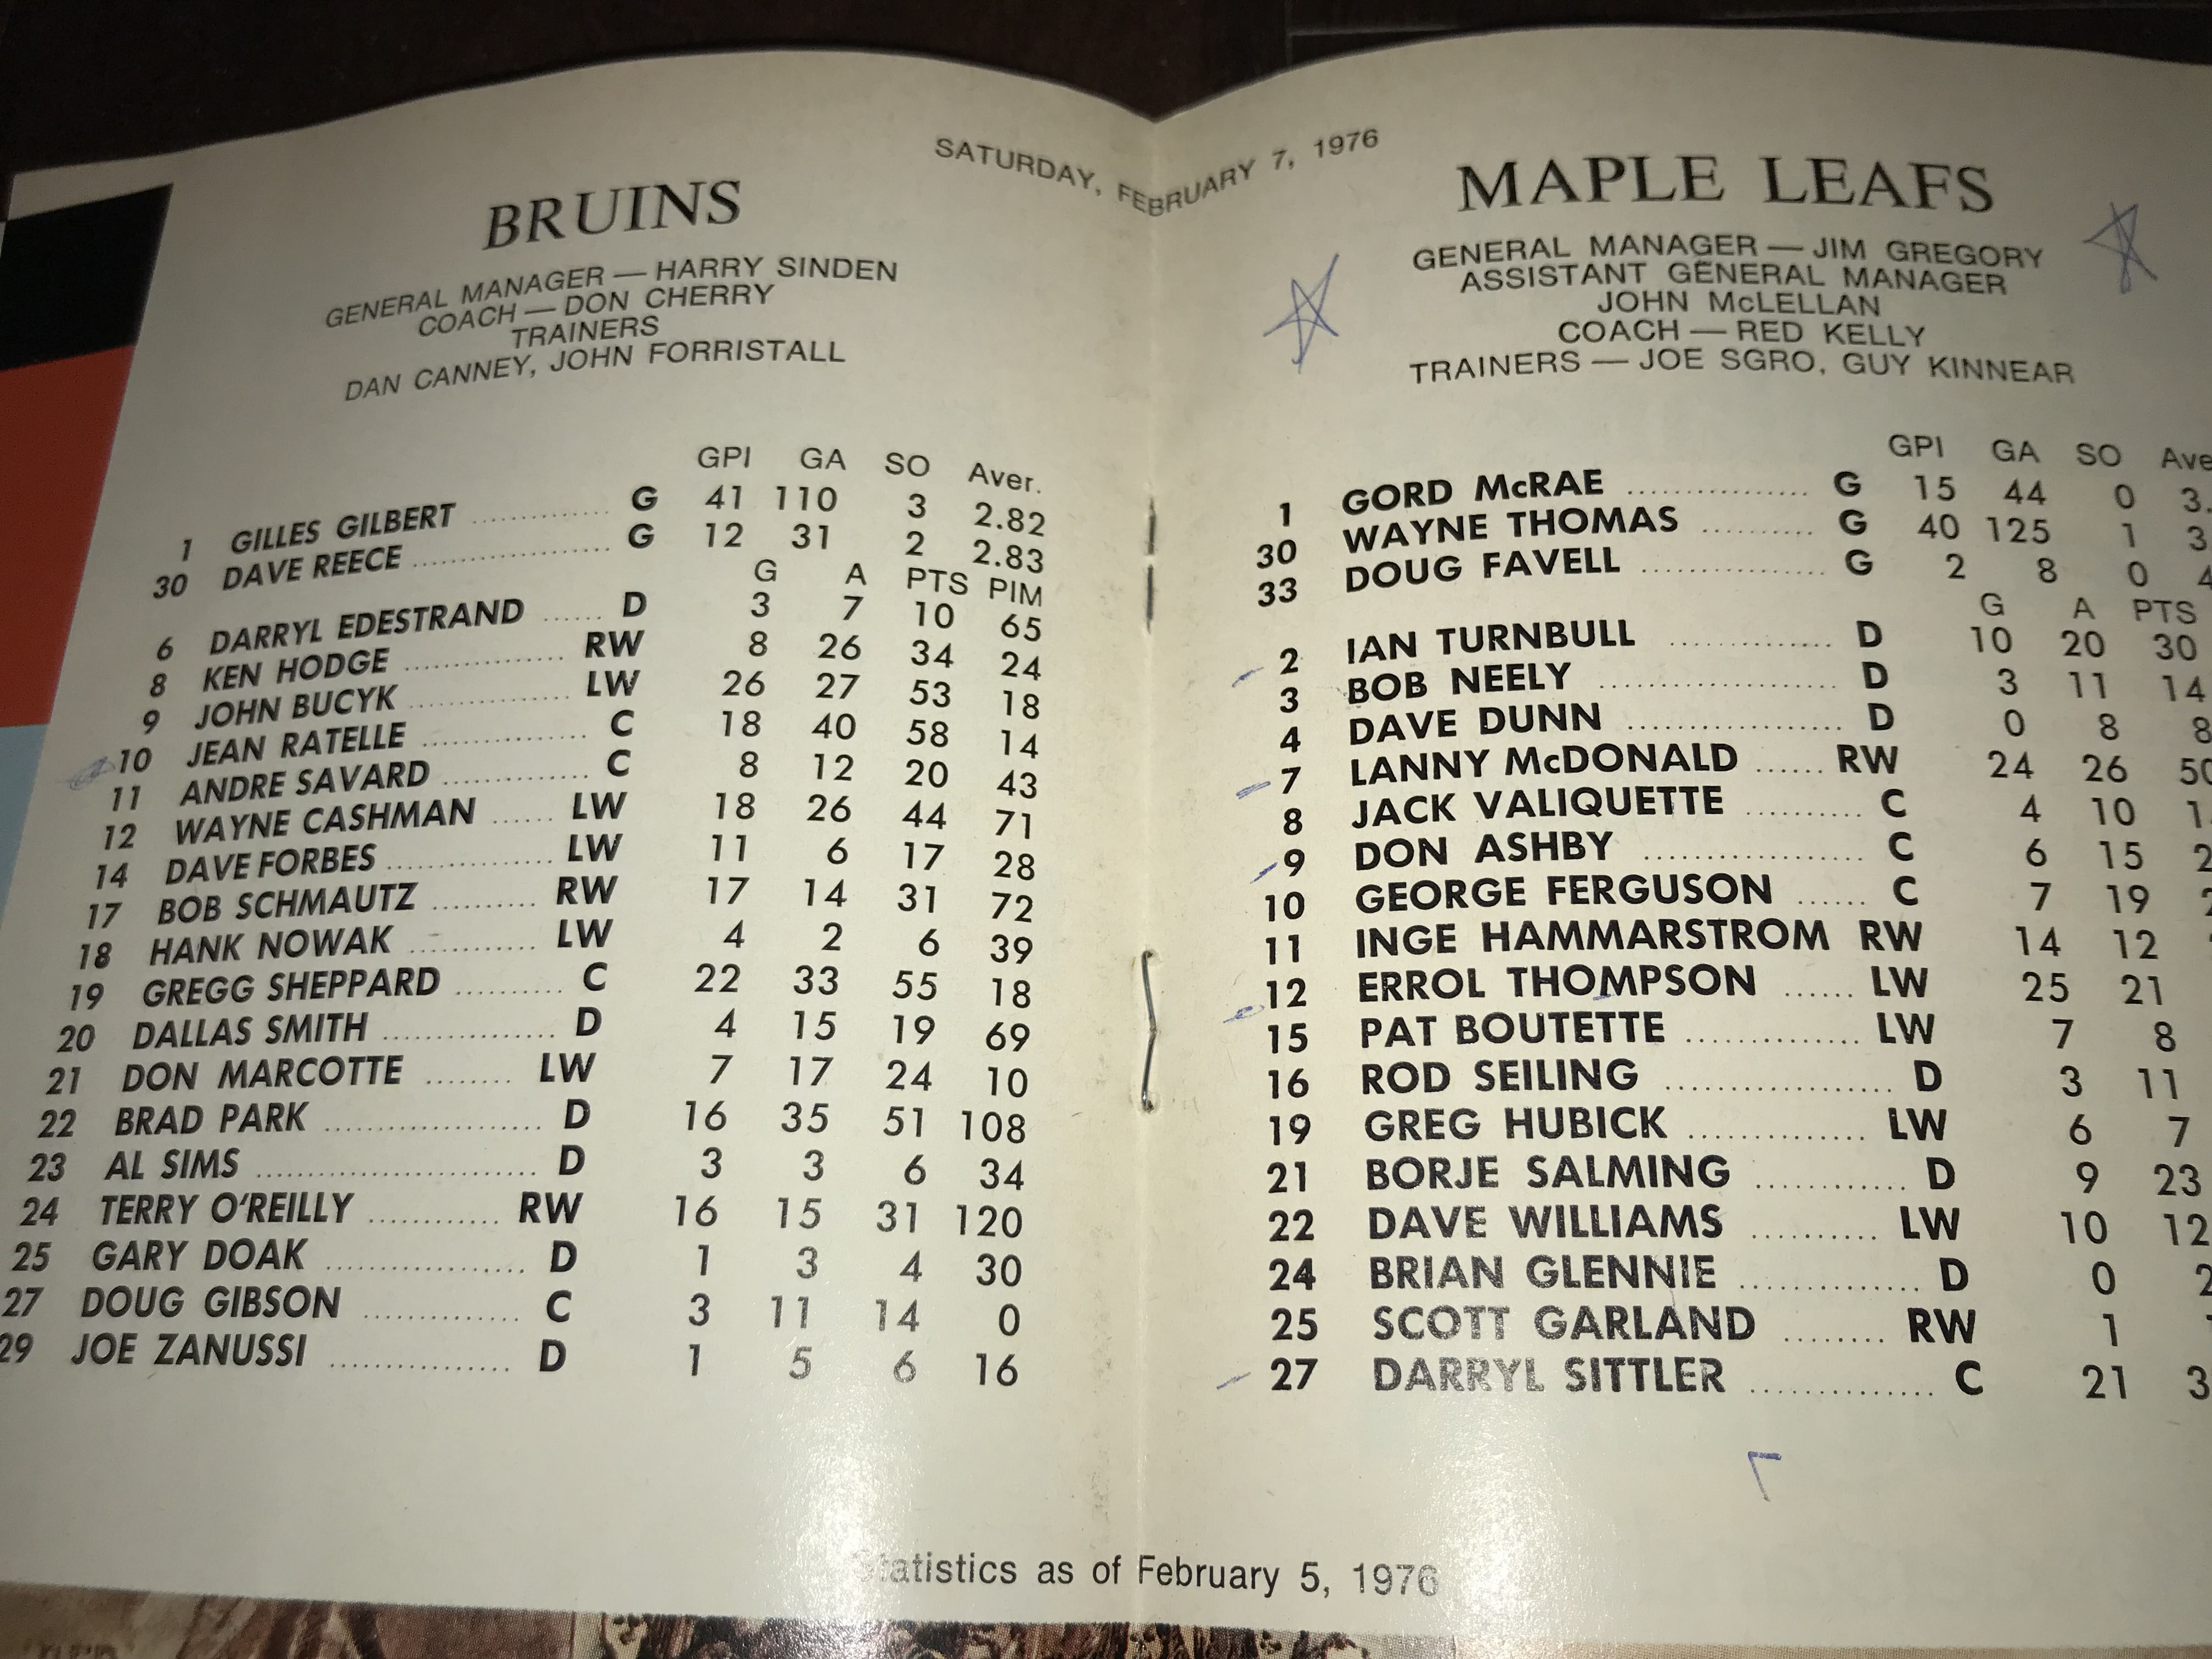 Darryl Sittler Toronto Maple Leafs Signed & Dated 10 Point Game